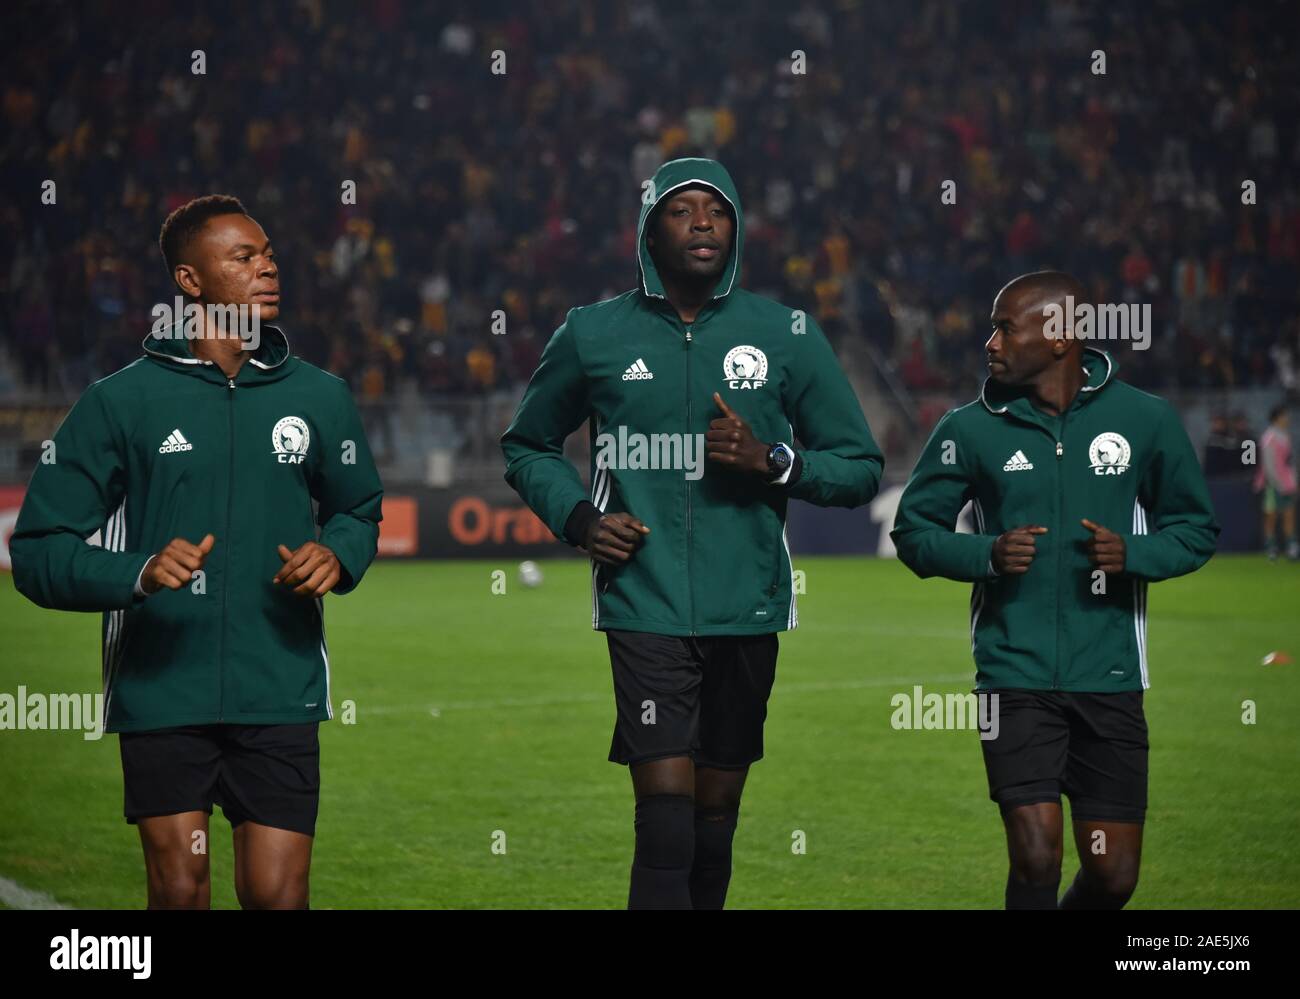 Rades, Tunisia. 06th Dec, 2019. Maguette Ndiaye, El haj malick samba and nouha bangoura are seen before the CAF Champions League 2019 - 20 football match between Esperance sportive tunisia and Jeunesse Sportive of Kabylie in Rades.(Final score; Esperance sportive 1: 0 Sportive Kabylie) Credit: SOPA Images Limited/Alamy Live News Stock Photo